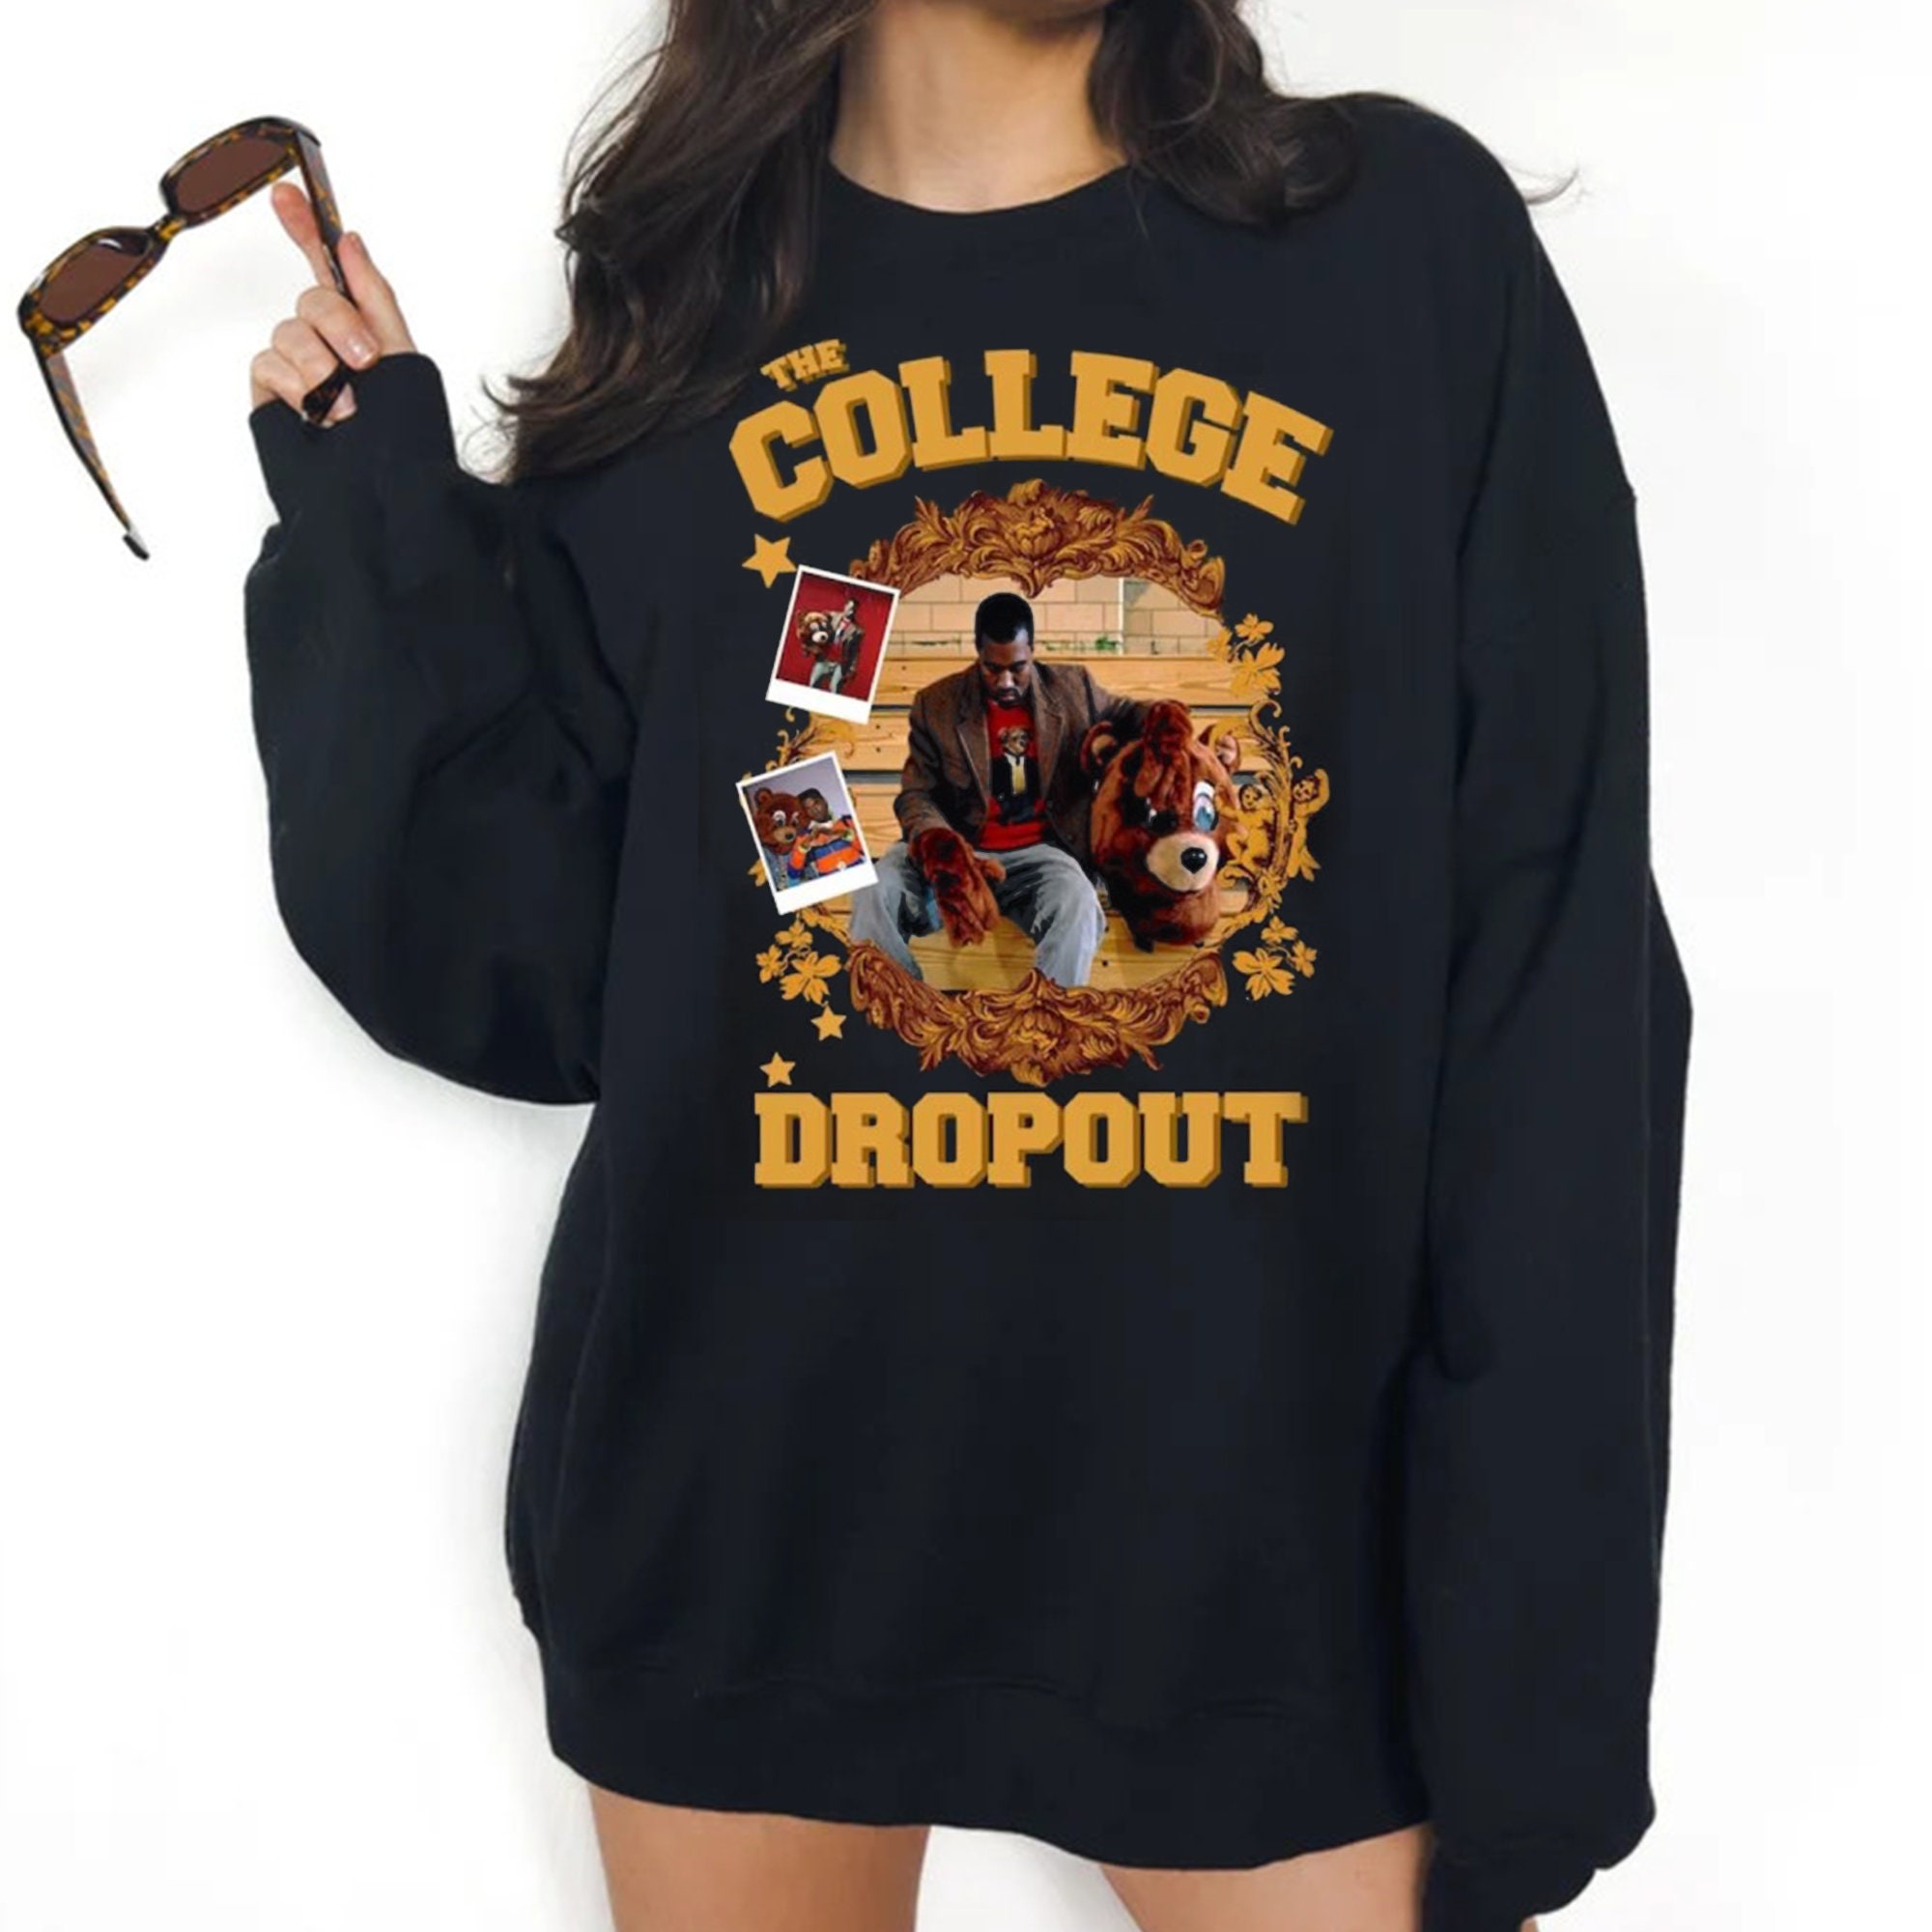 10 Years Later: Kanye West's The College Dropout - Deadshirt